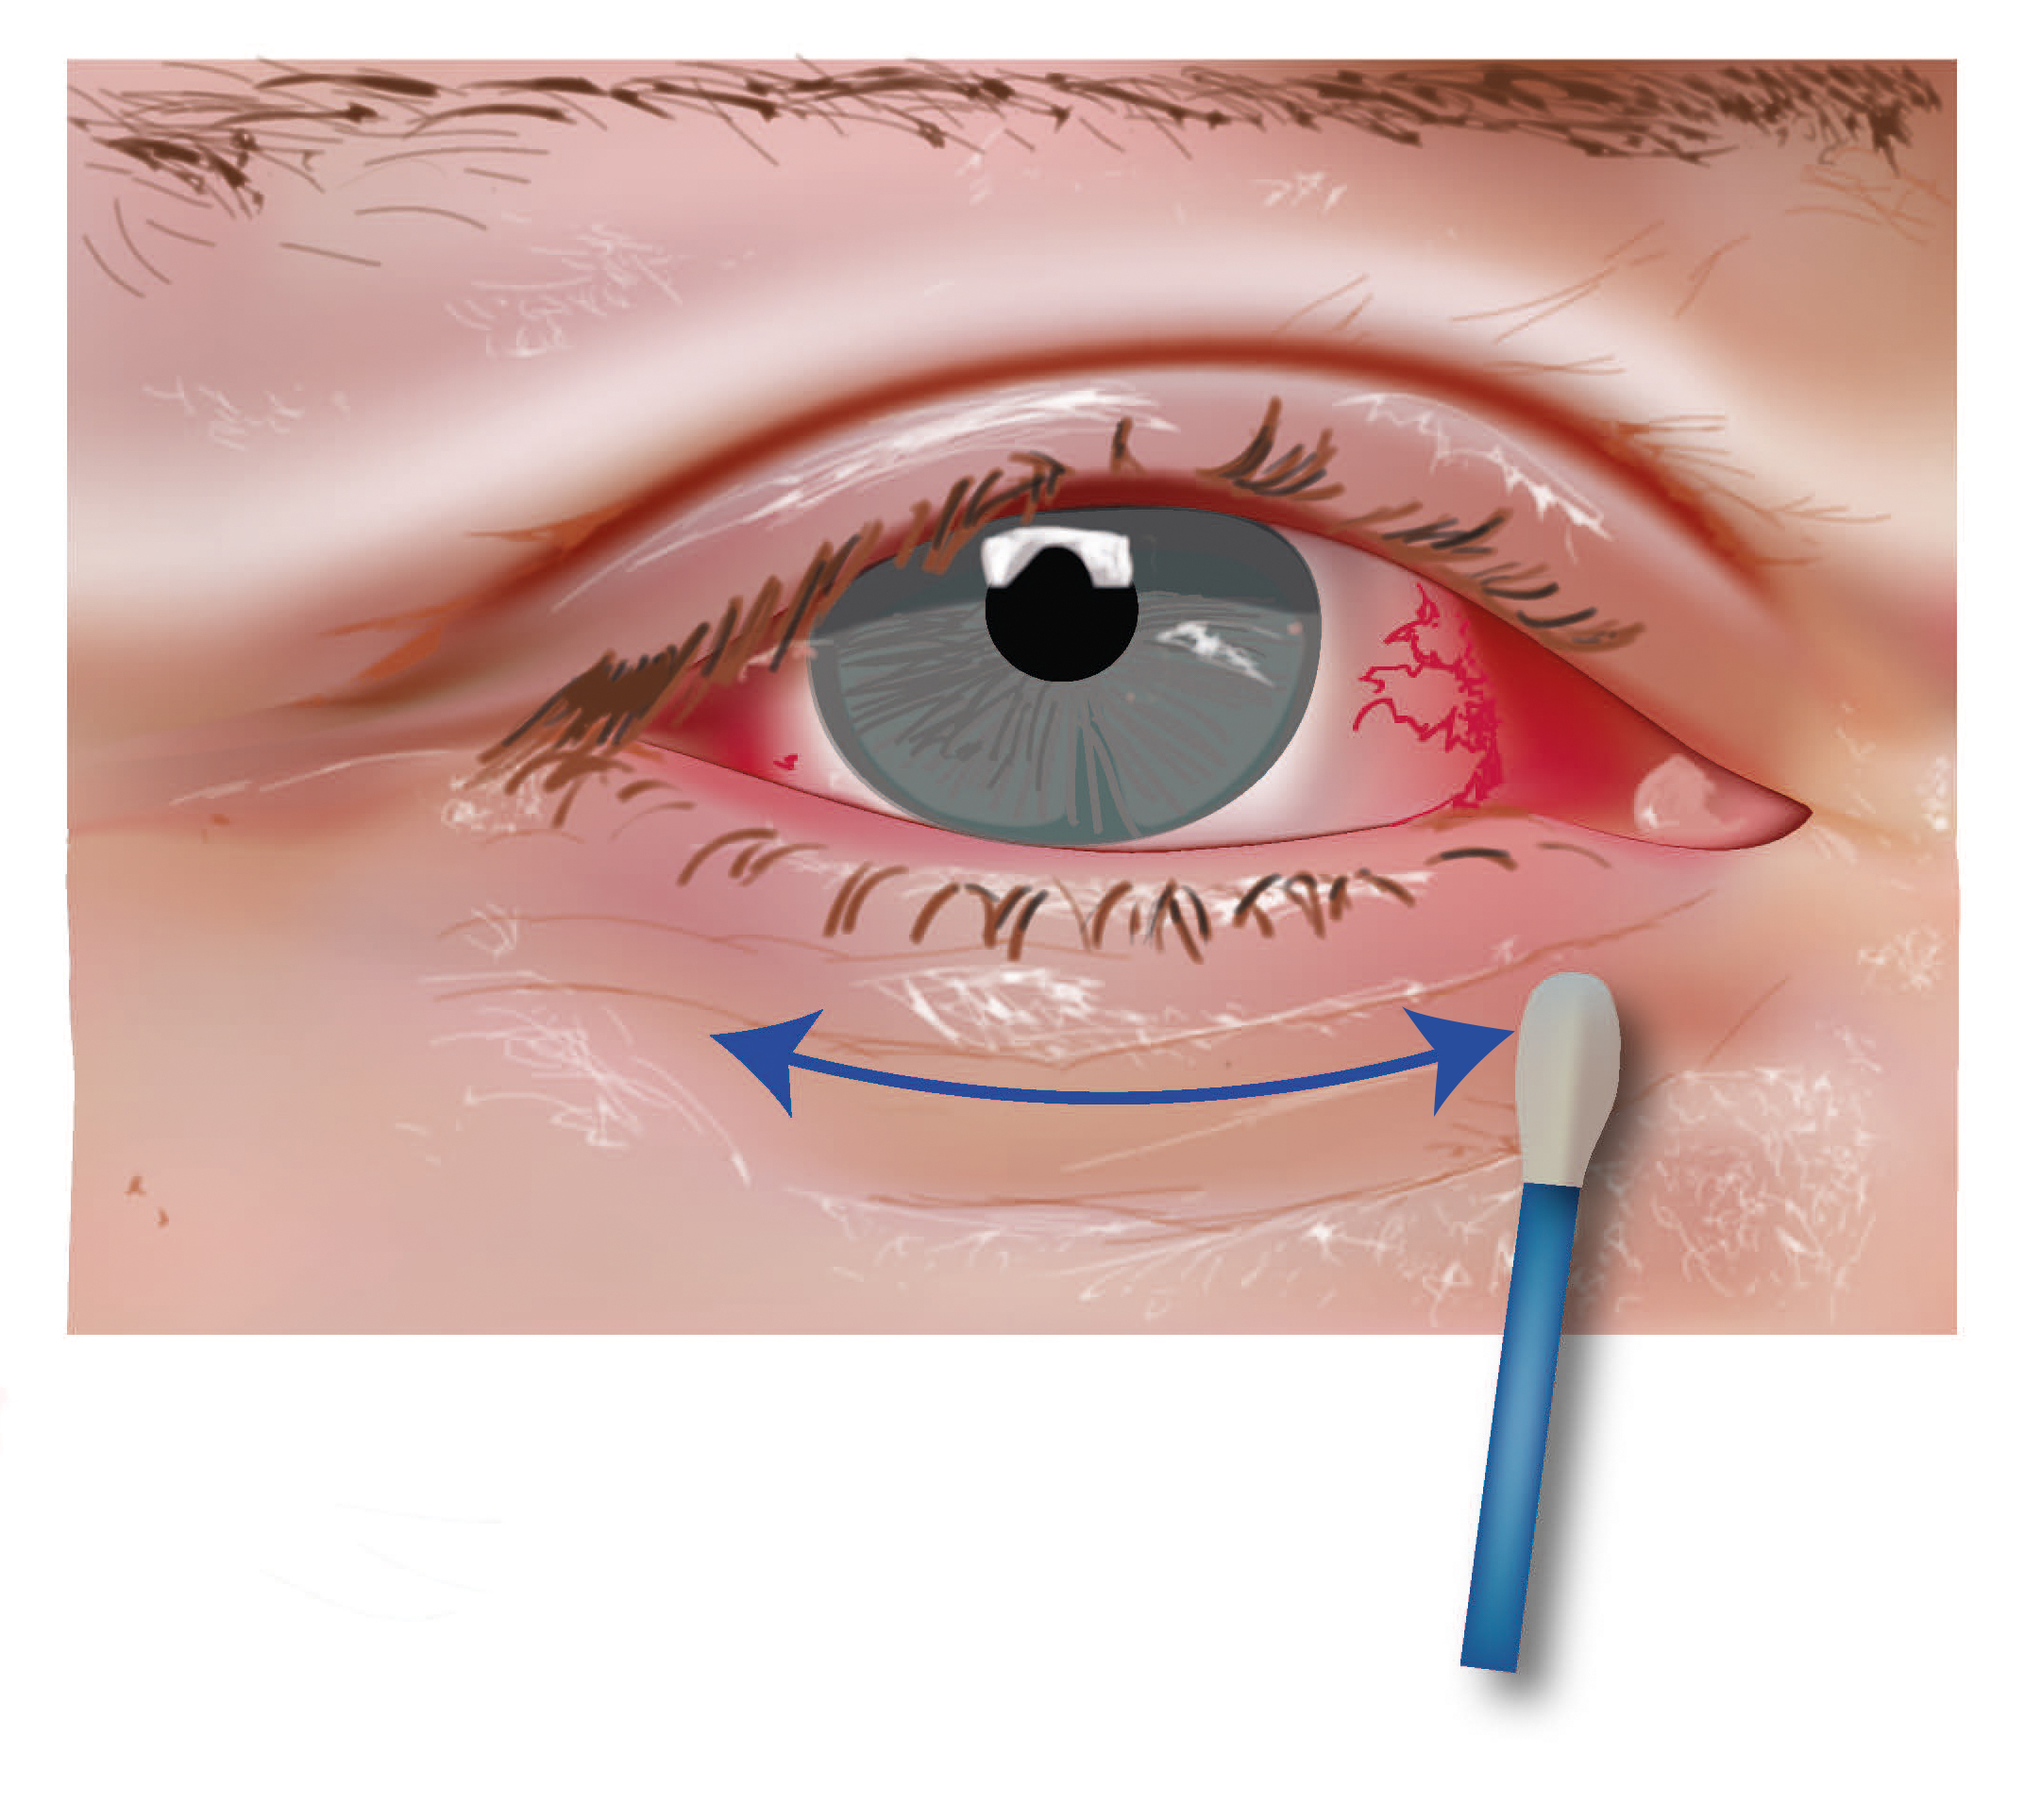 Cleaning your eye with a cotton bud, with a side to side motion